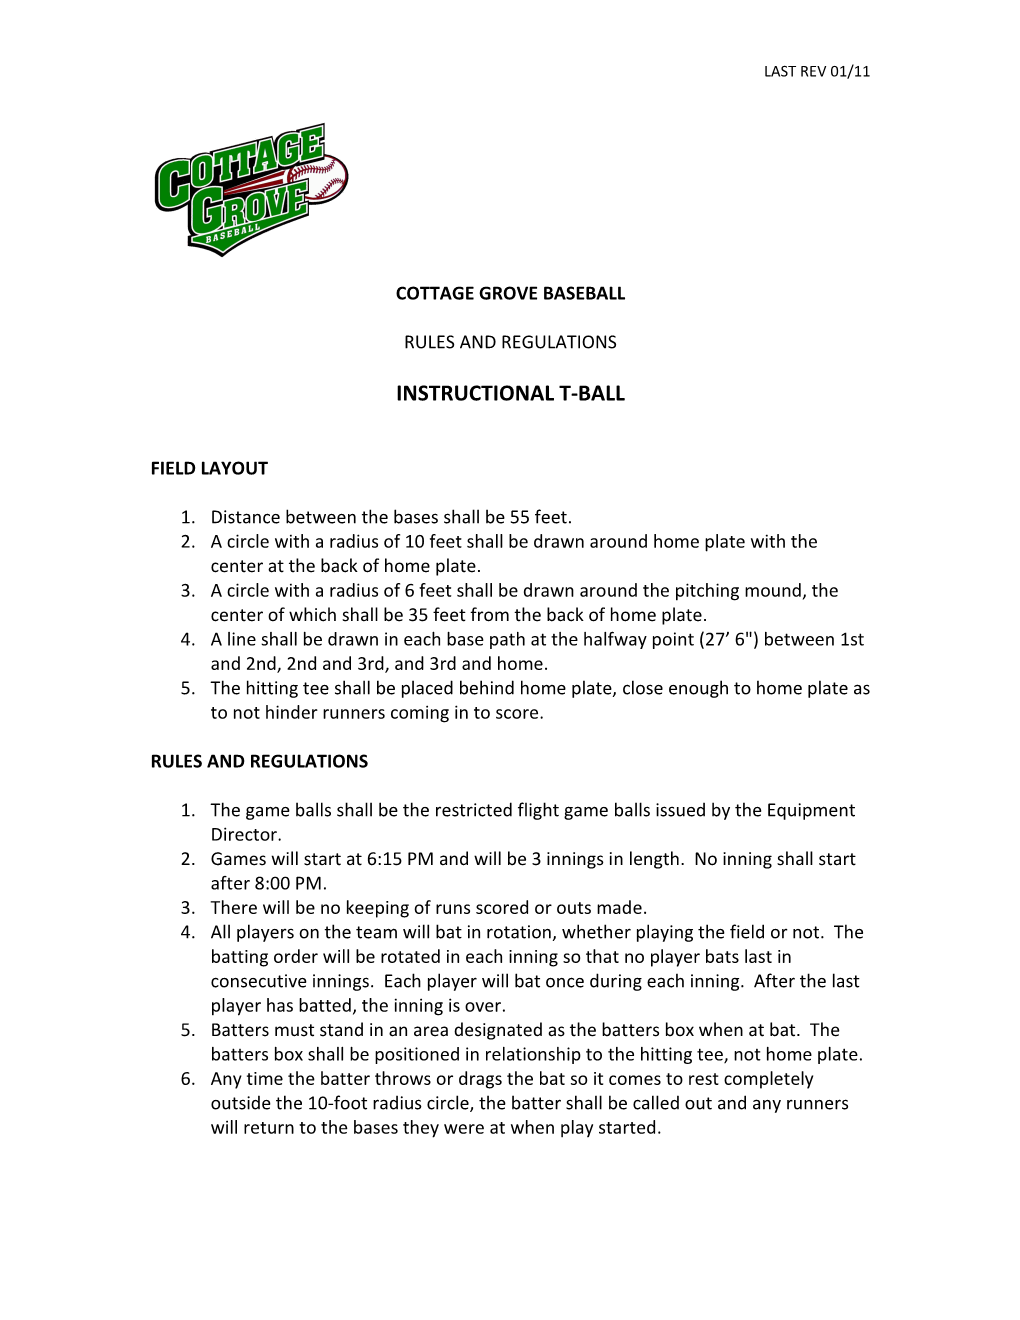 Instructional T-Ball Rules